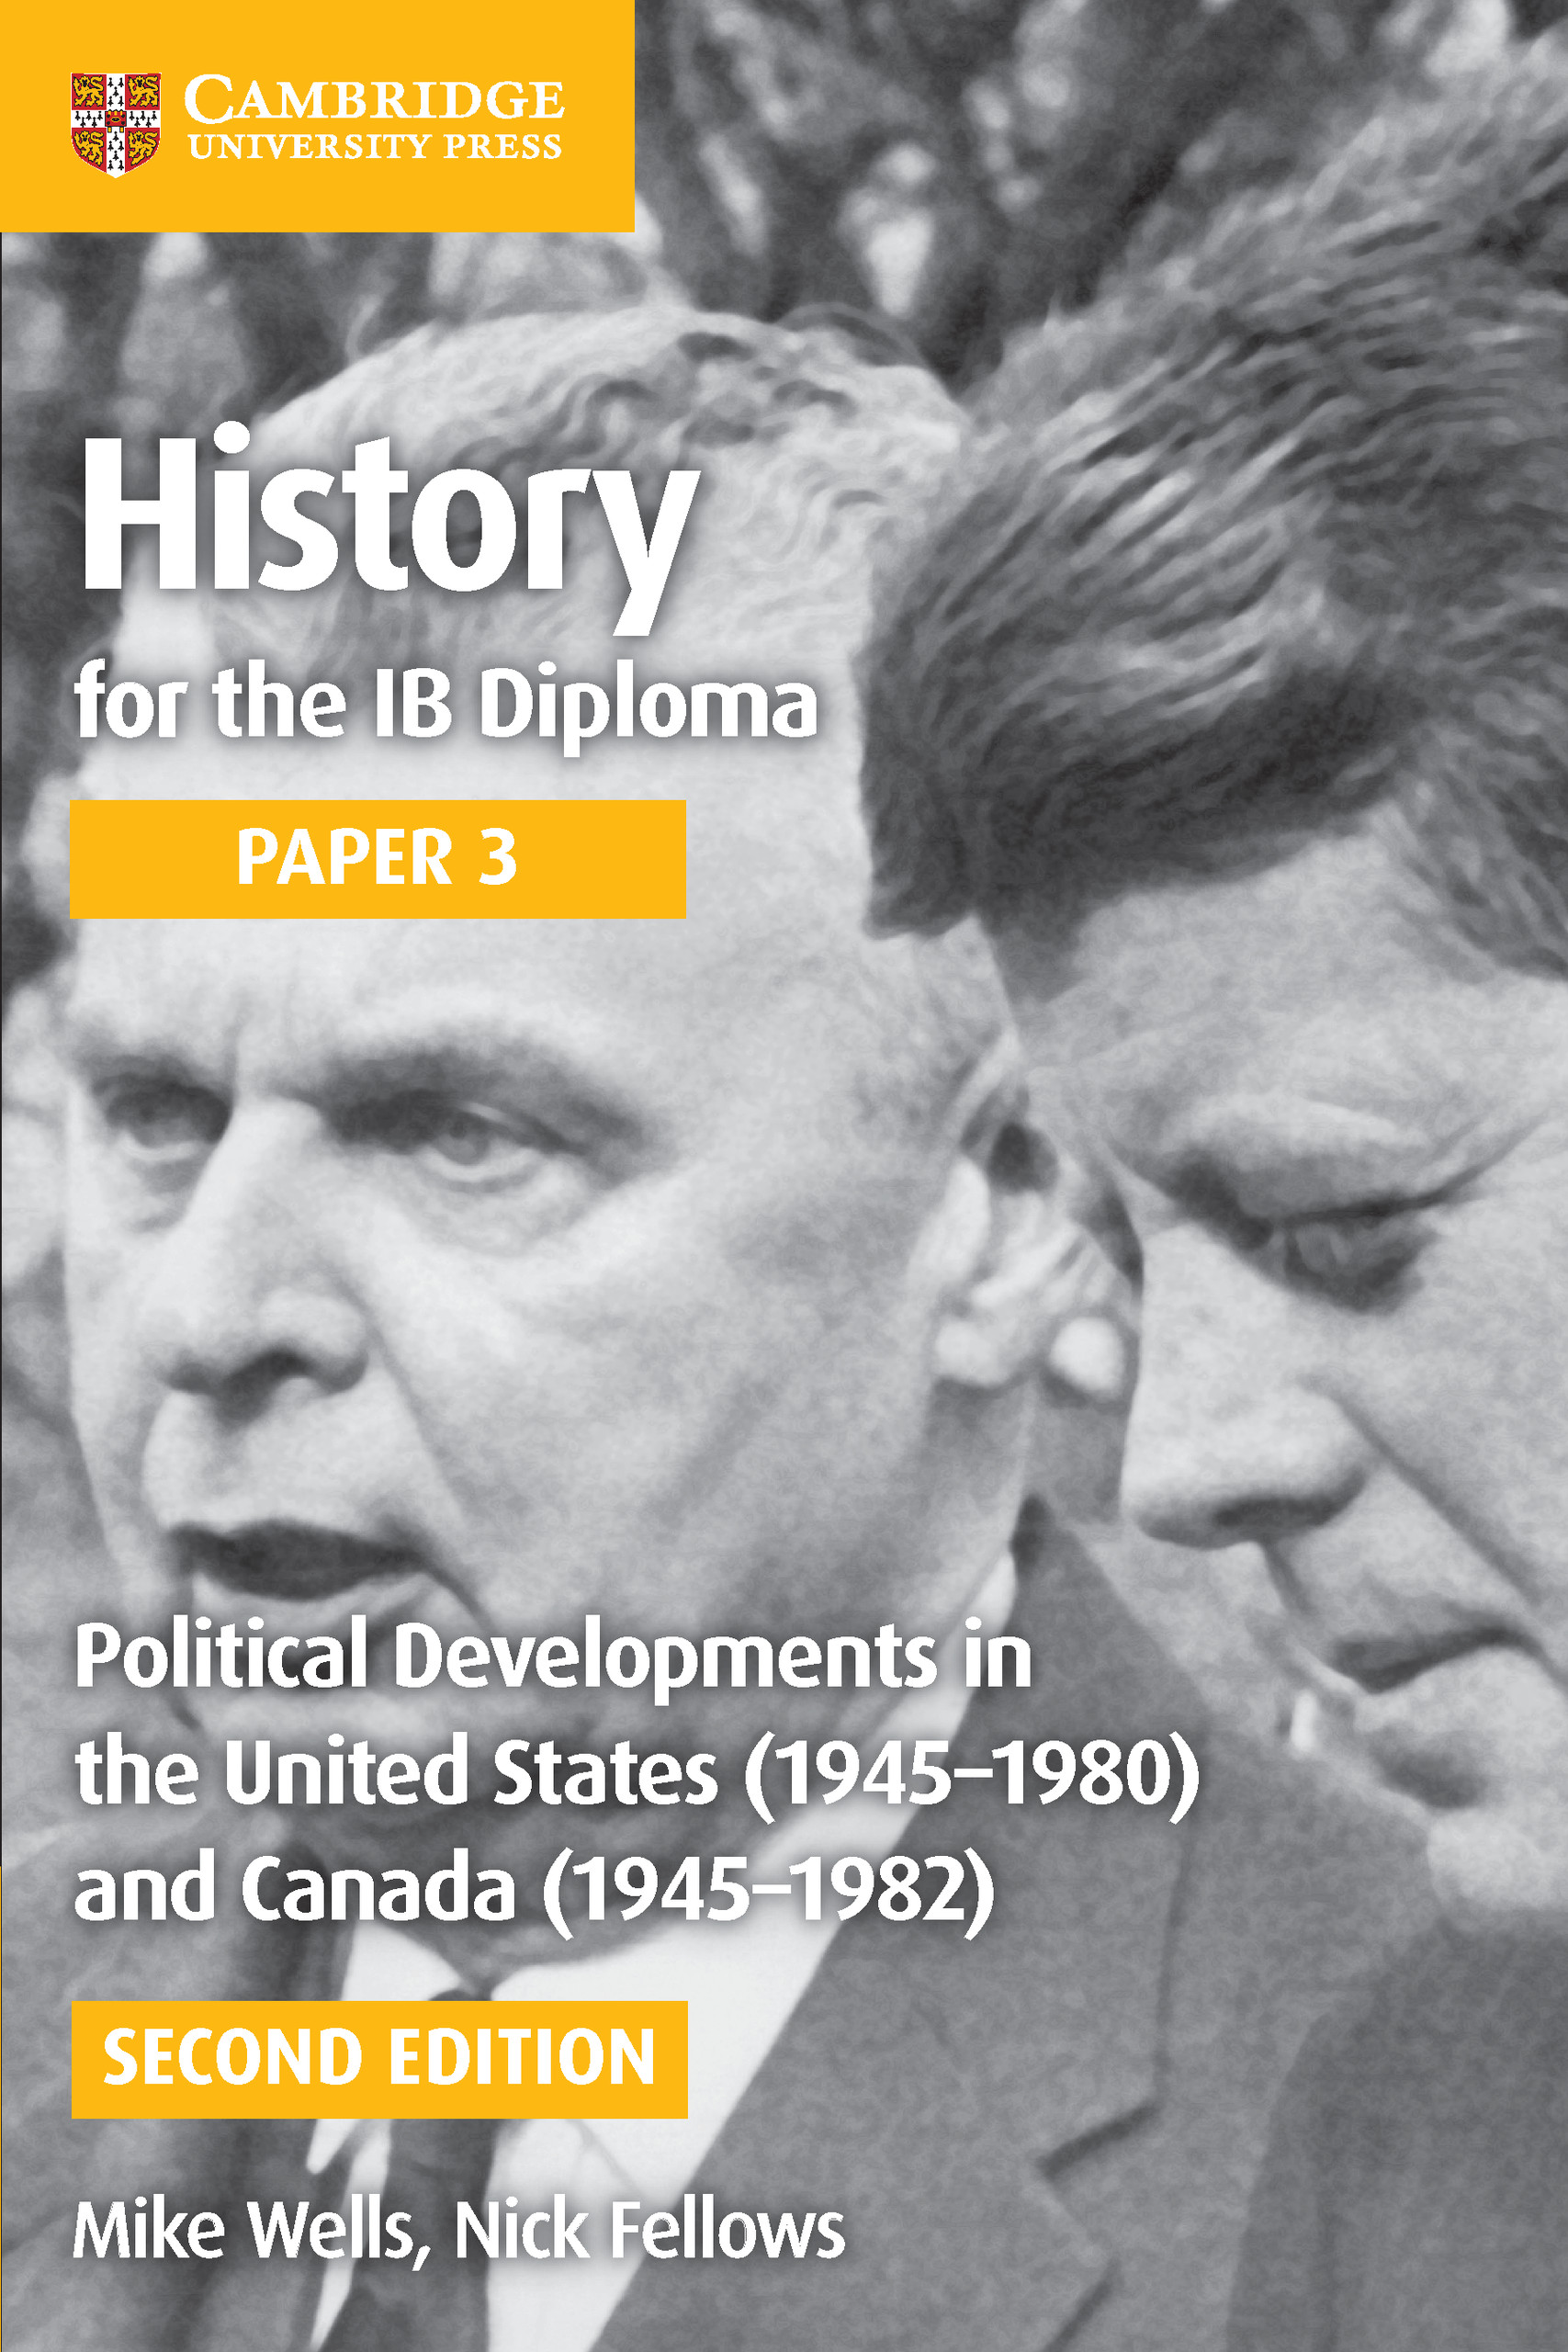 IB History Paper 3: Political Developments in the United States (1945–1980) and Canada (1945–1982)